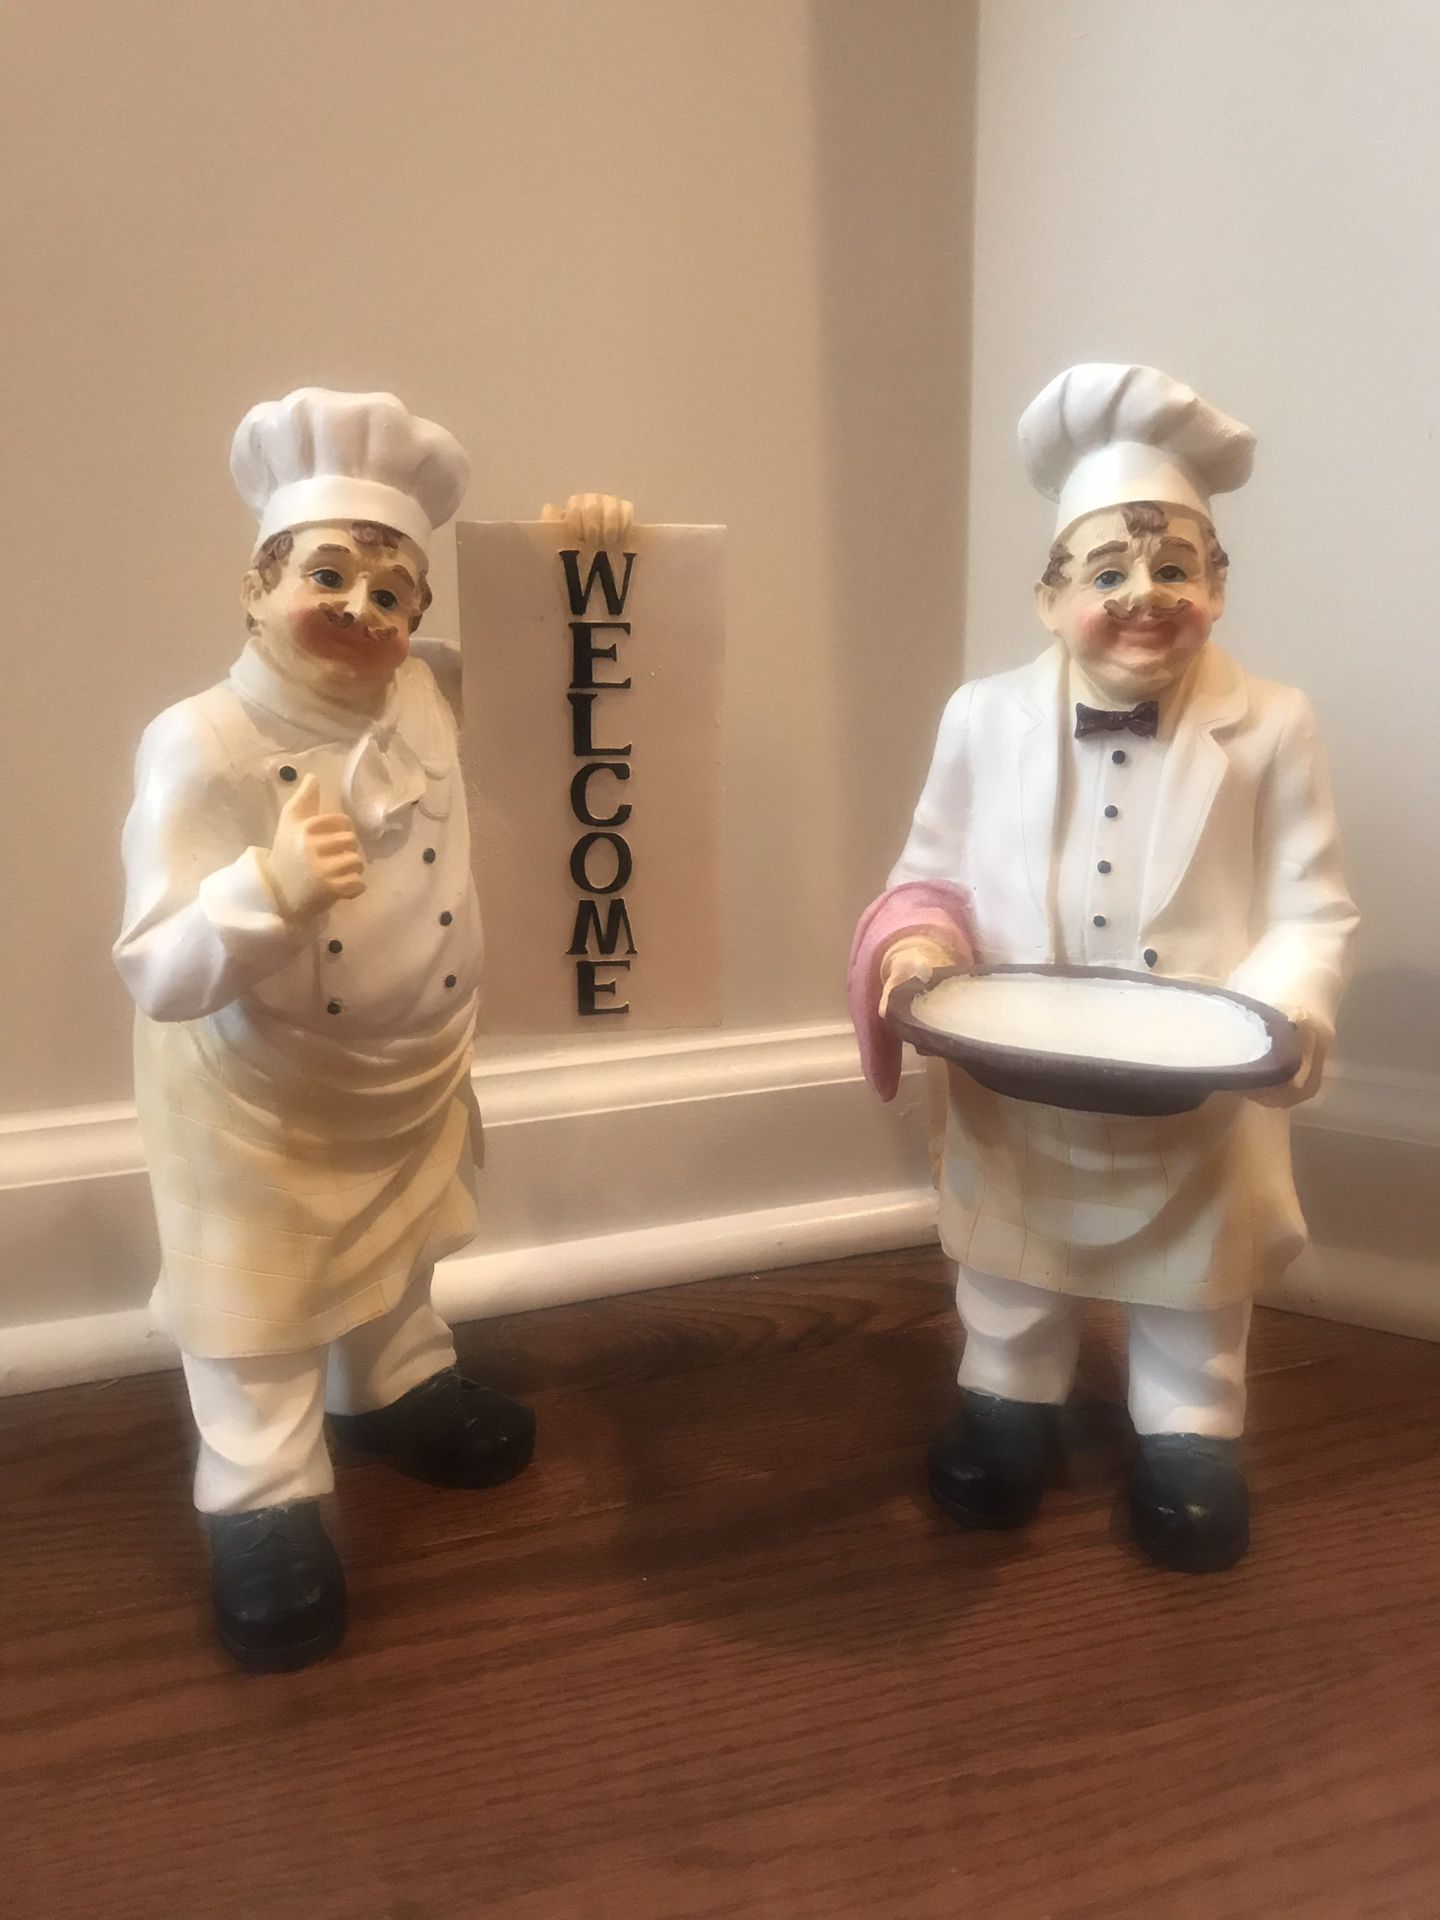 2 HAND PAINTED WOODEN CHEF FIGURINES